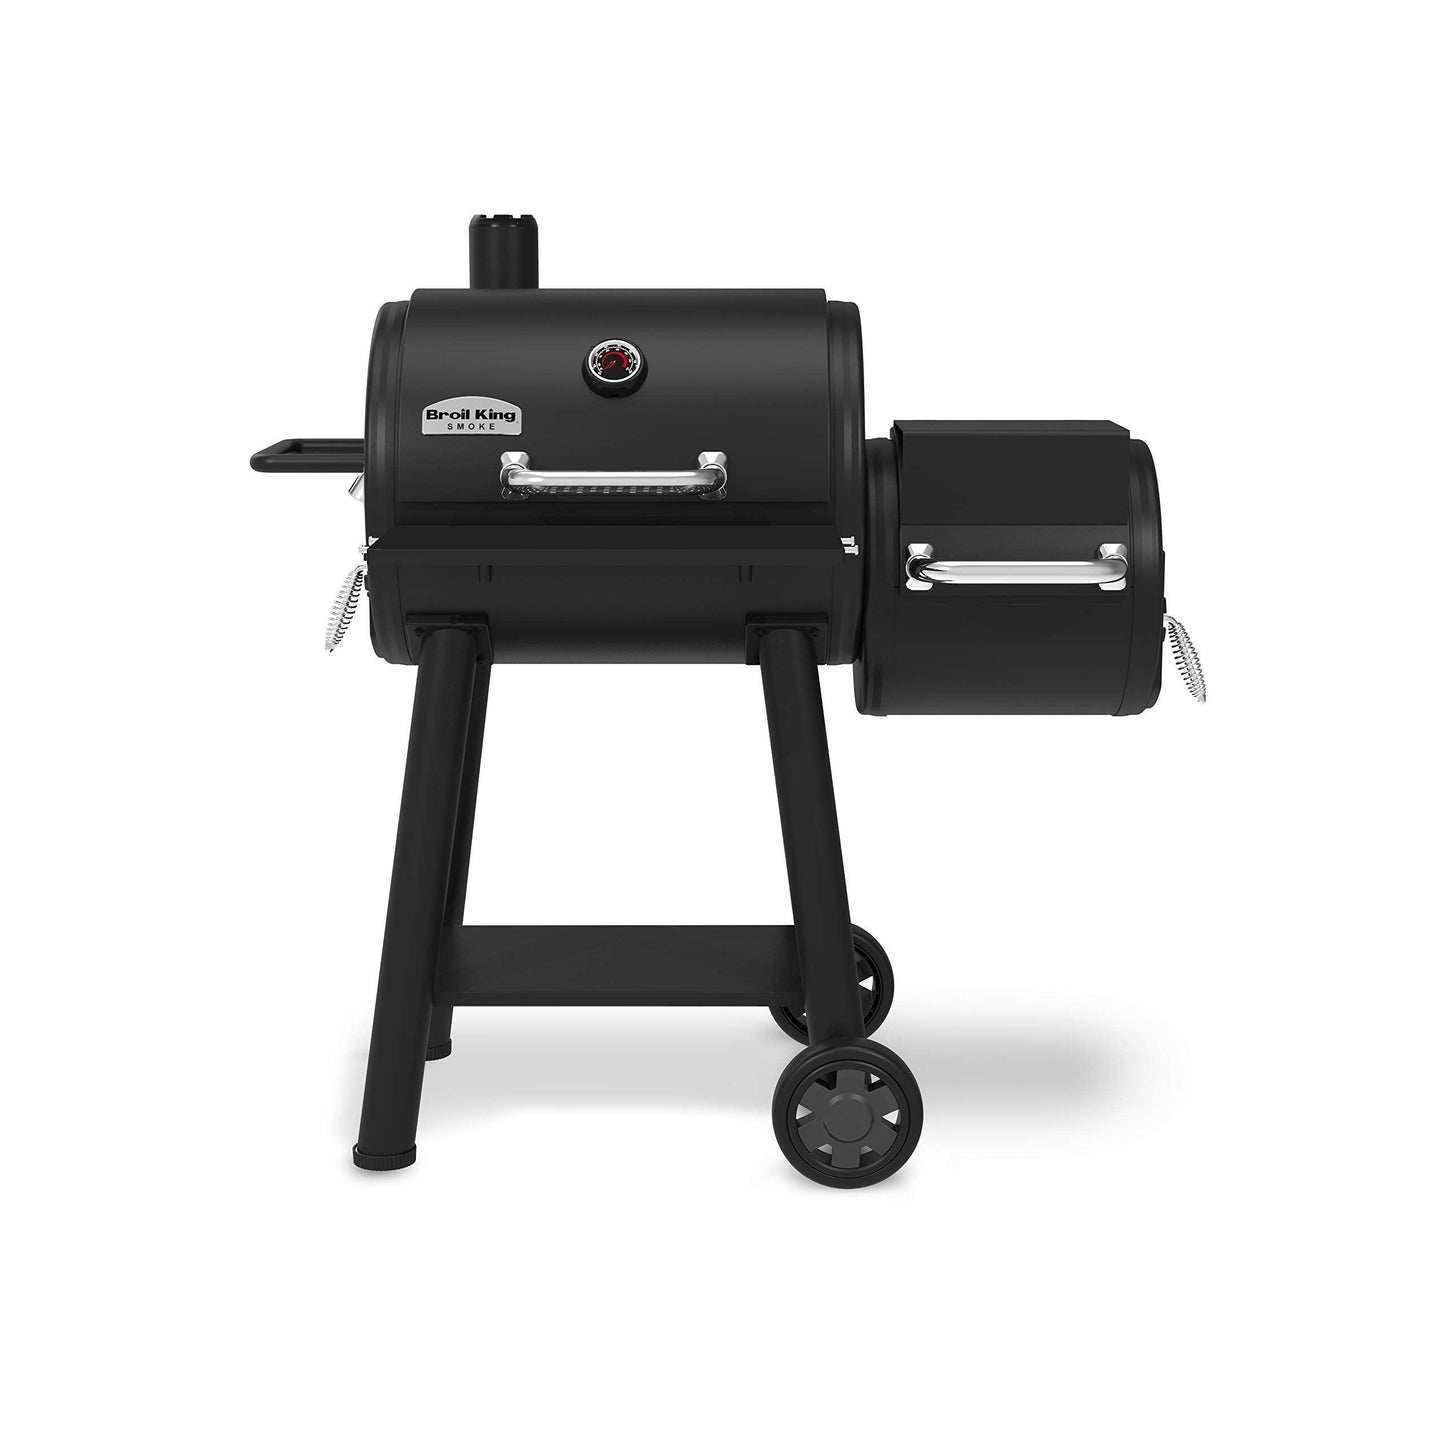 Broil King 955050 Smoke Offset 500 Offset Smoker and Grill, Black - CookCave